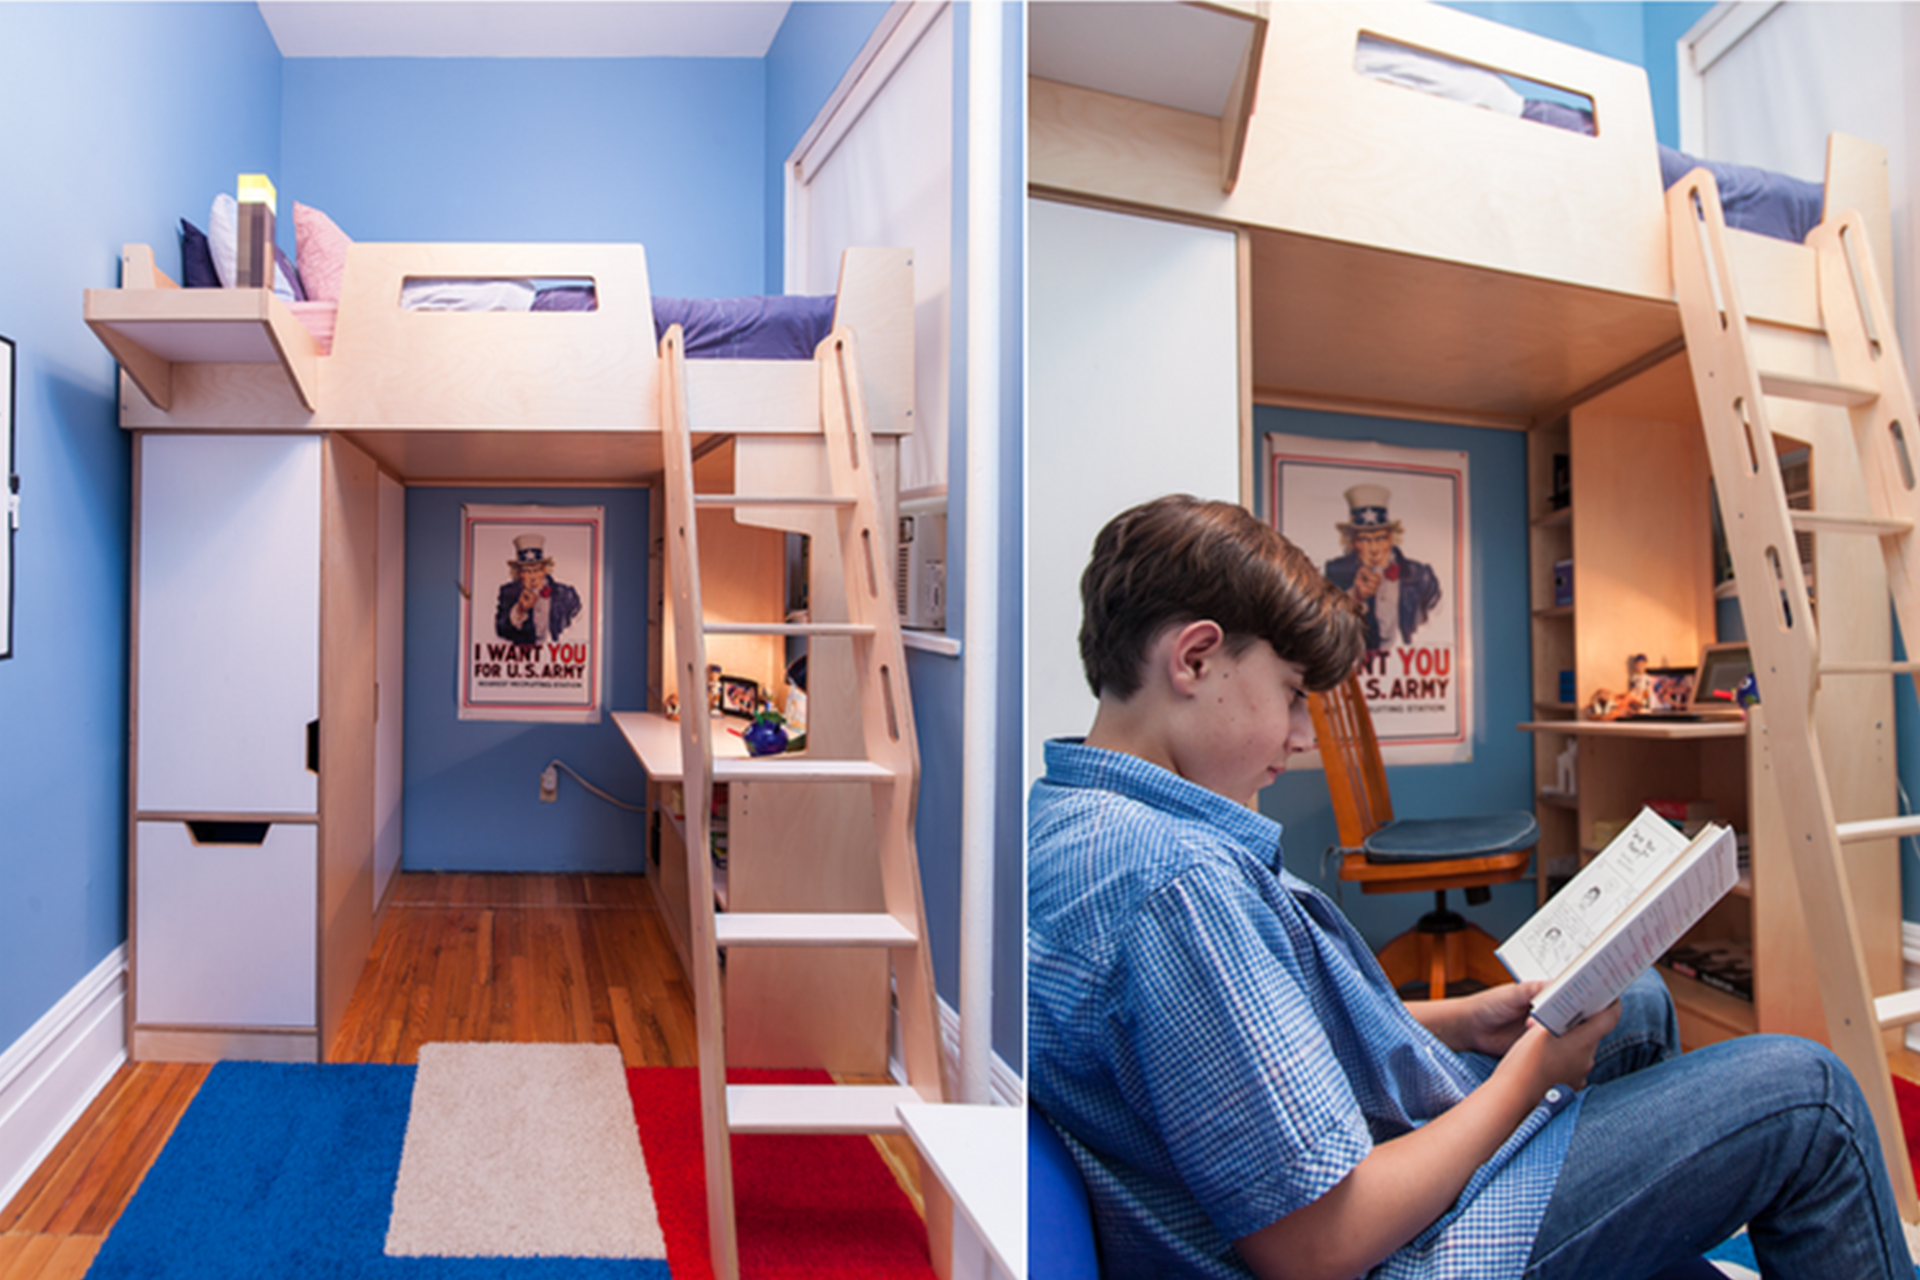 Collage of images: a blue room with a loft bed and desk underneath, featuring a boy reading a book.